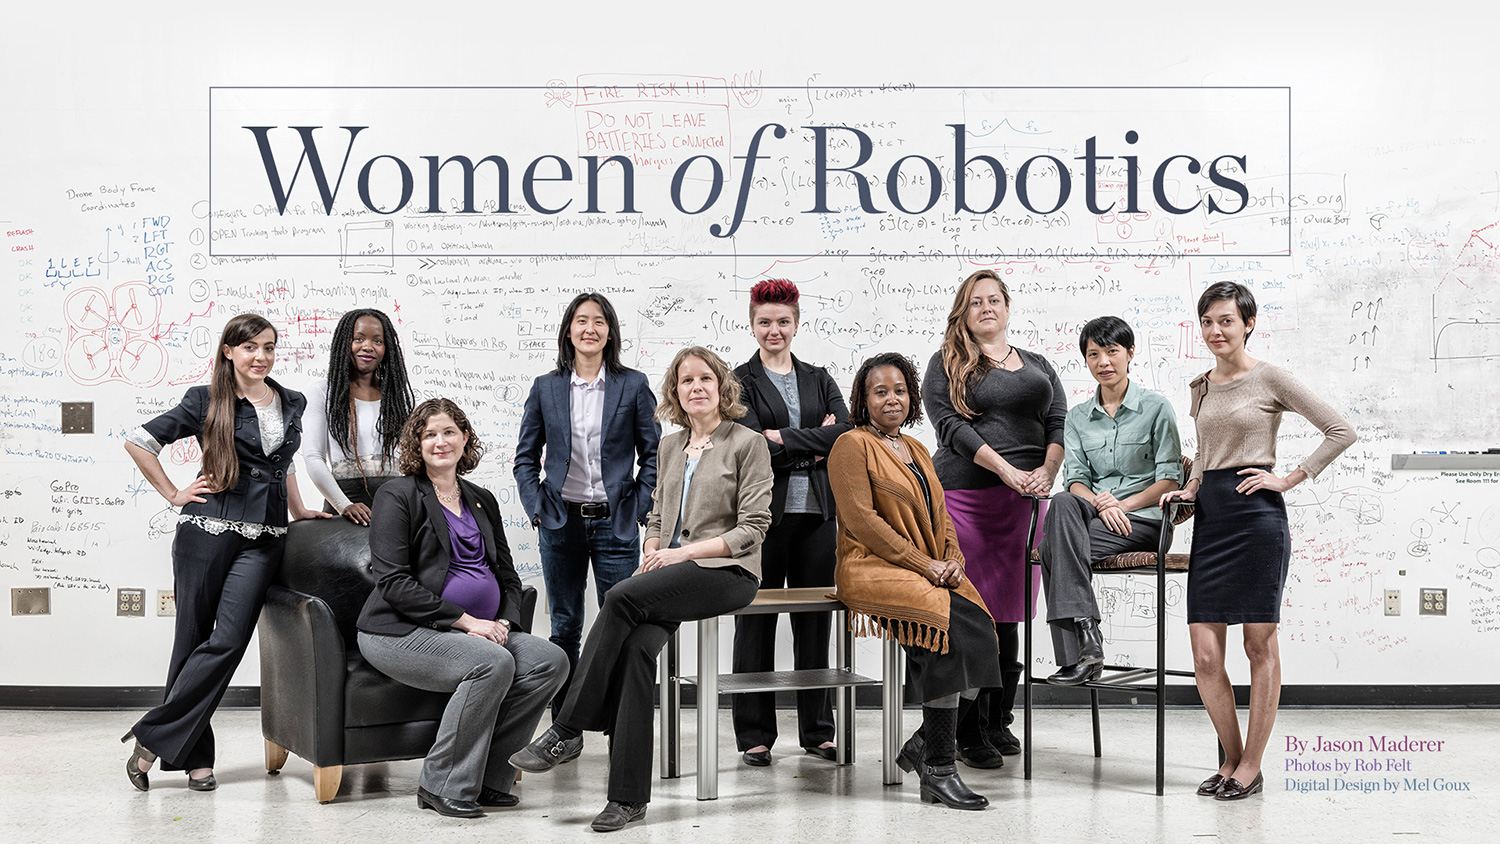 photo - group of 10 women in front of large white board in robotics lab